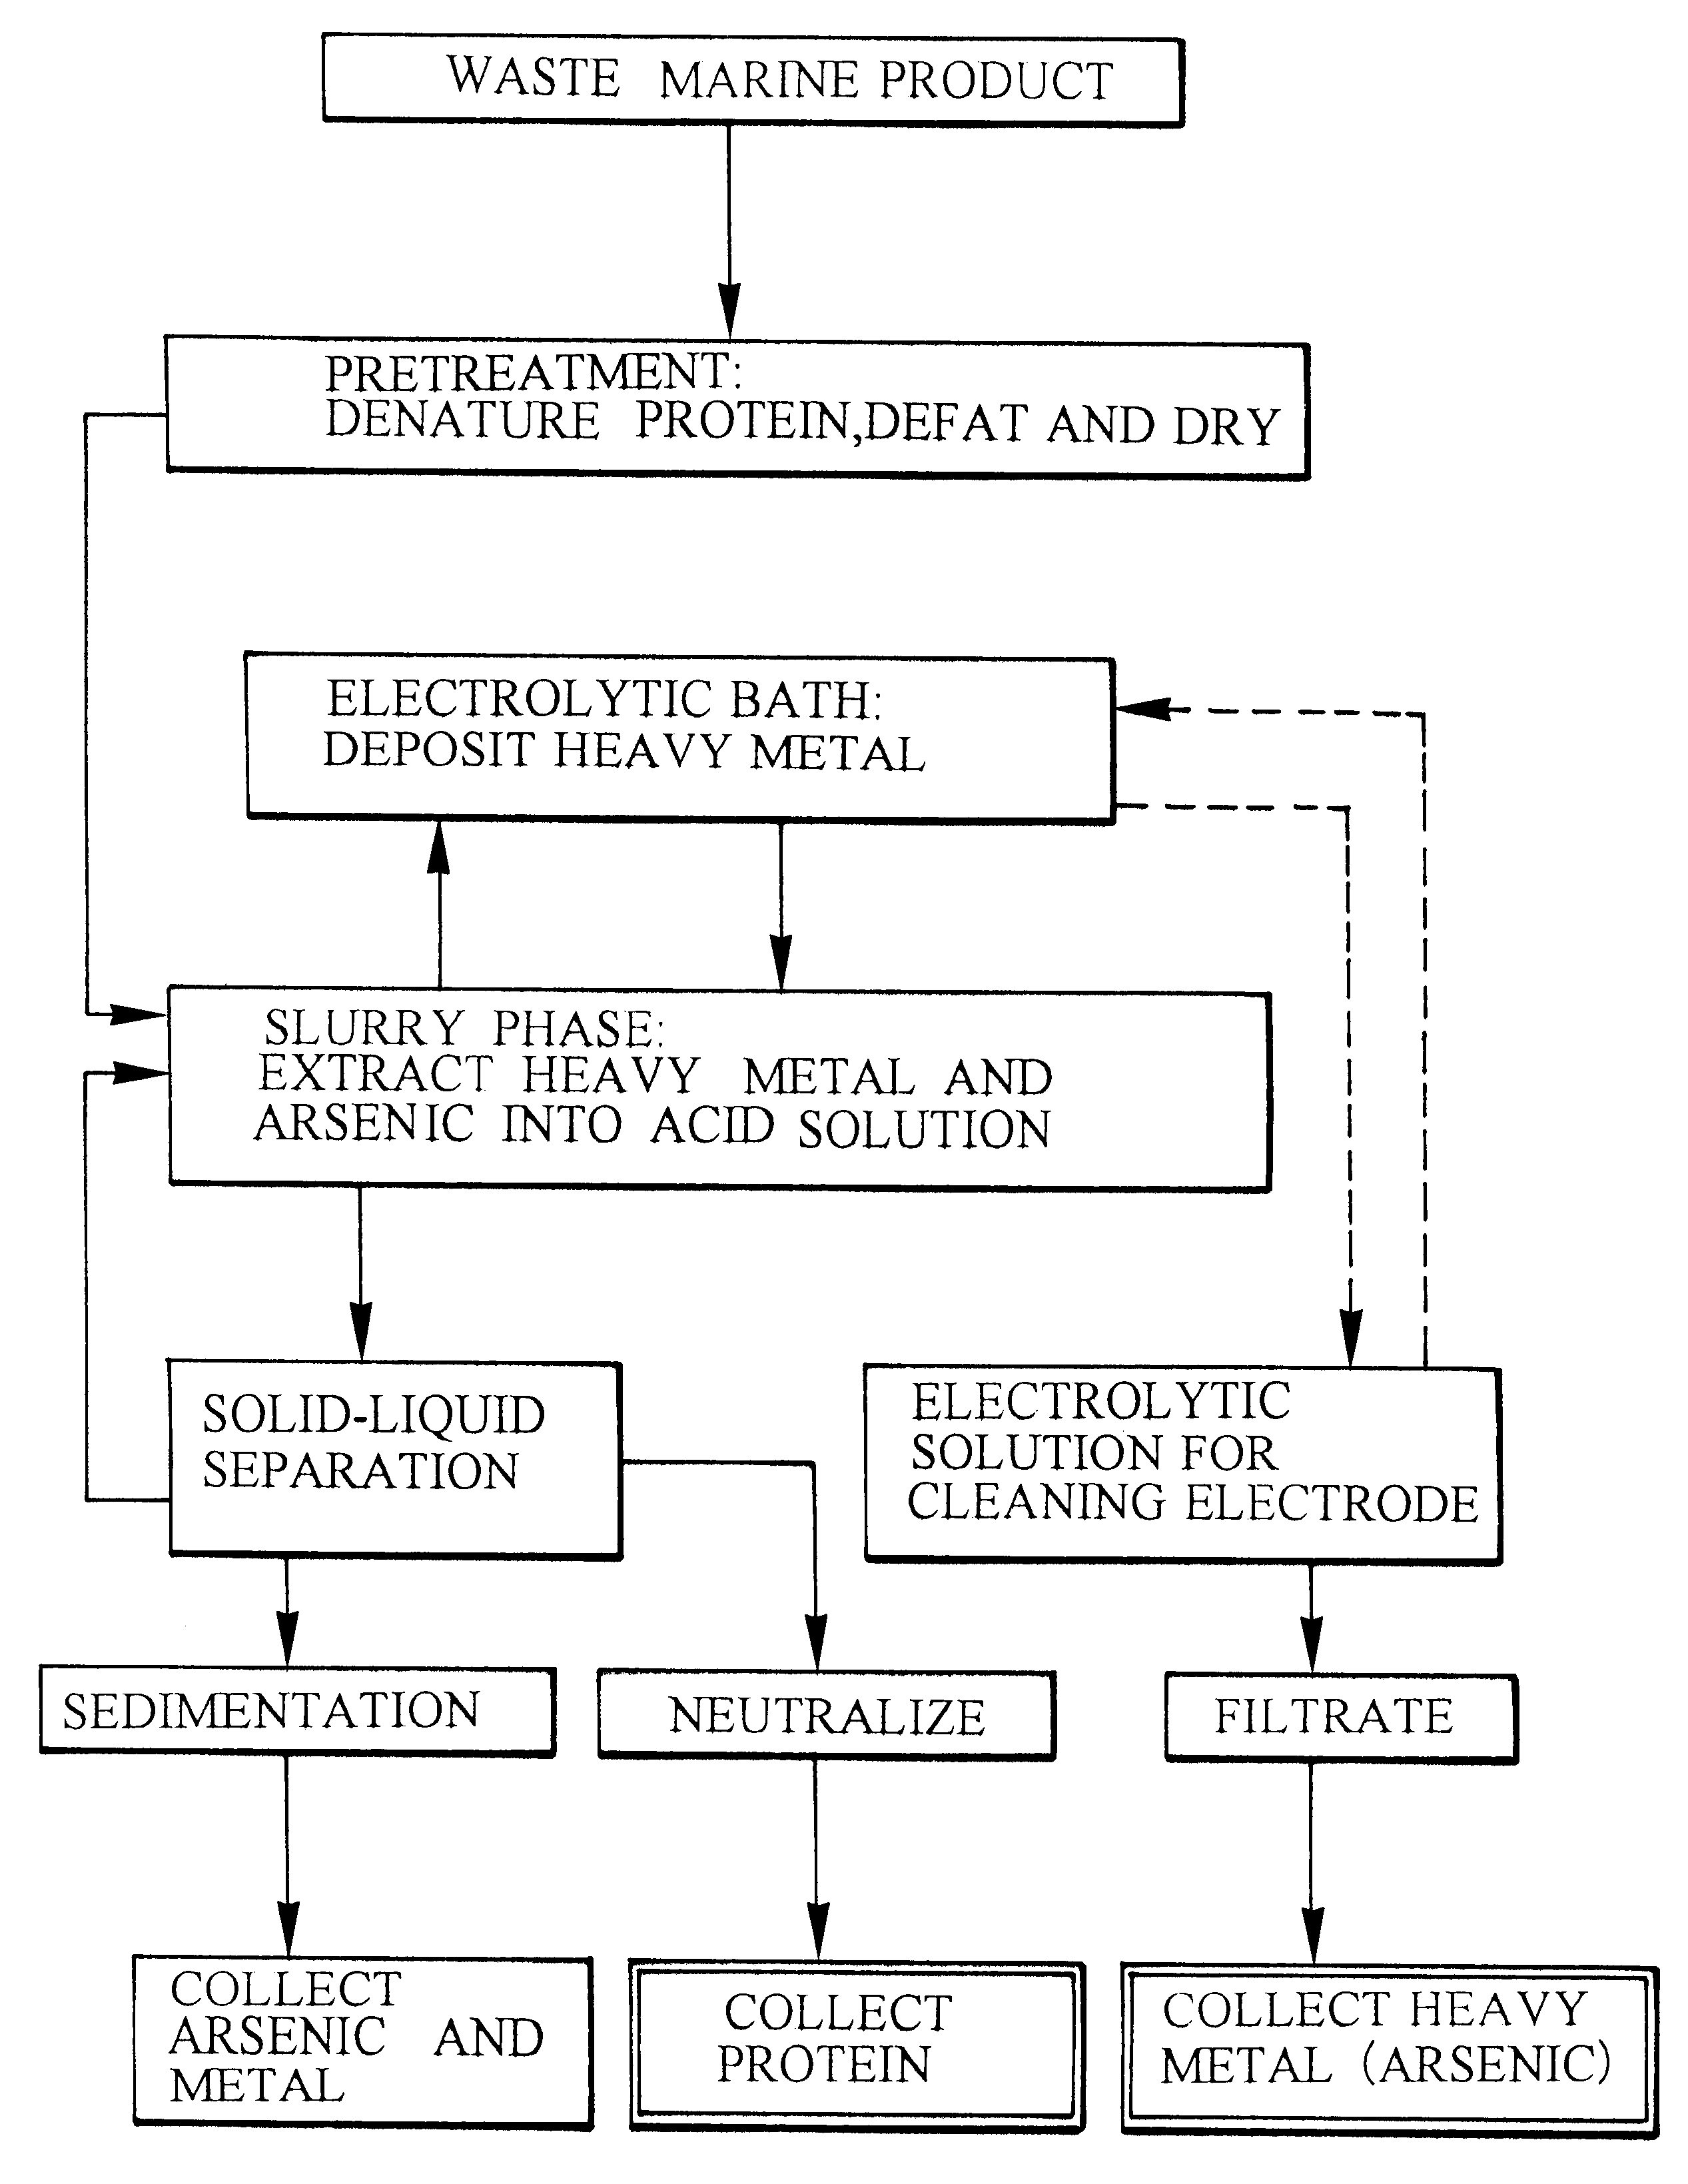 Method and apparatus for removing toxic substances from waste marine products